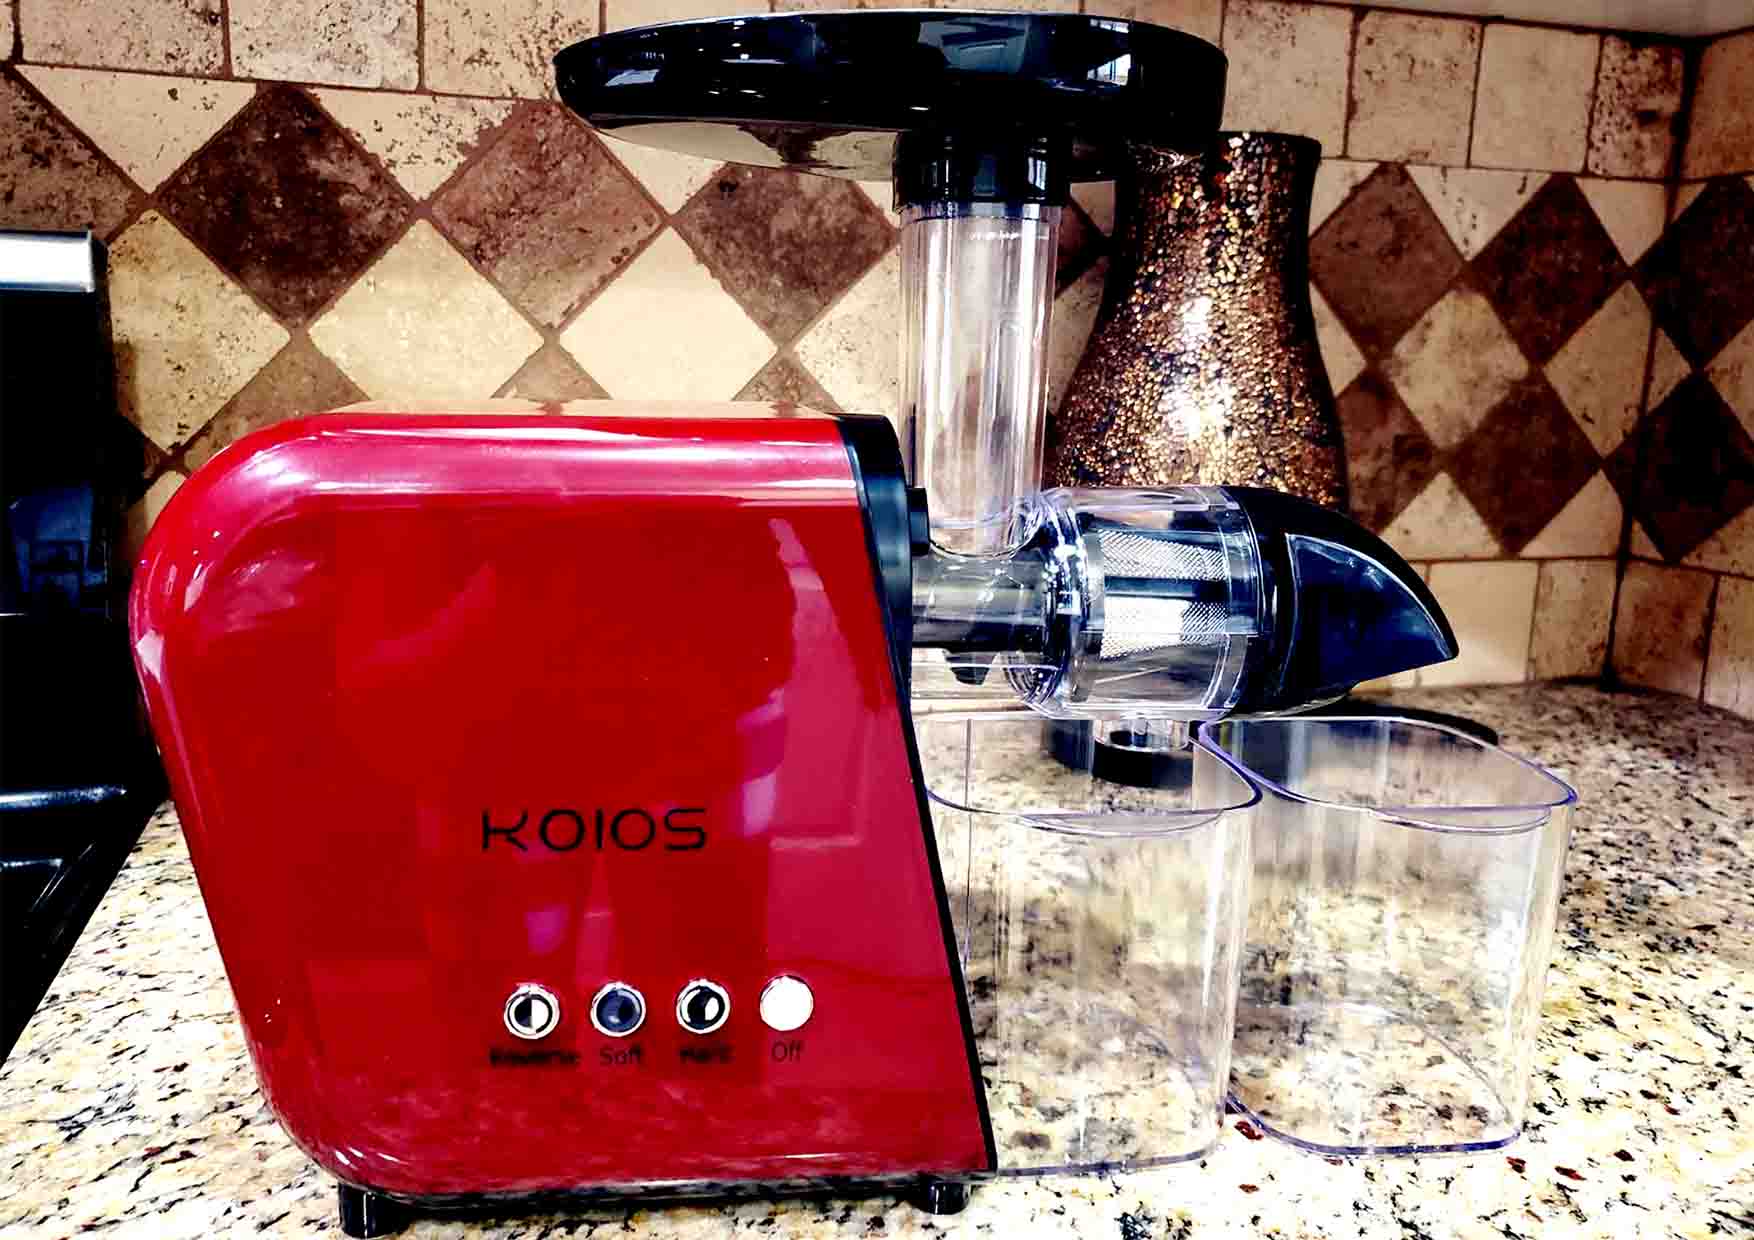 KOIOS Juicer, Slow Masticating Juicer Extractor with Reverse Function, Cold Press Juicer